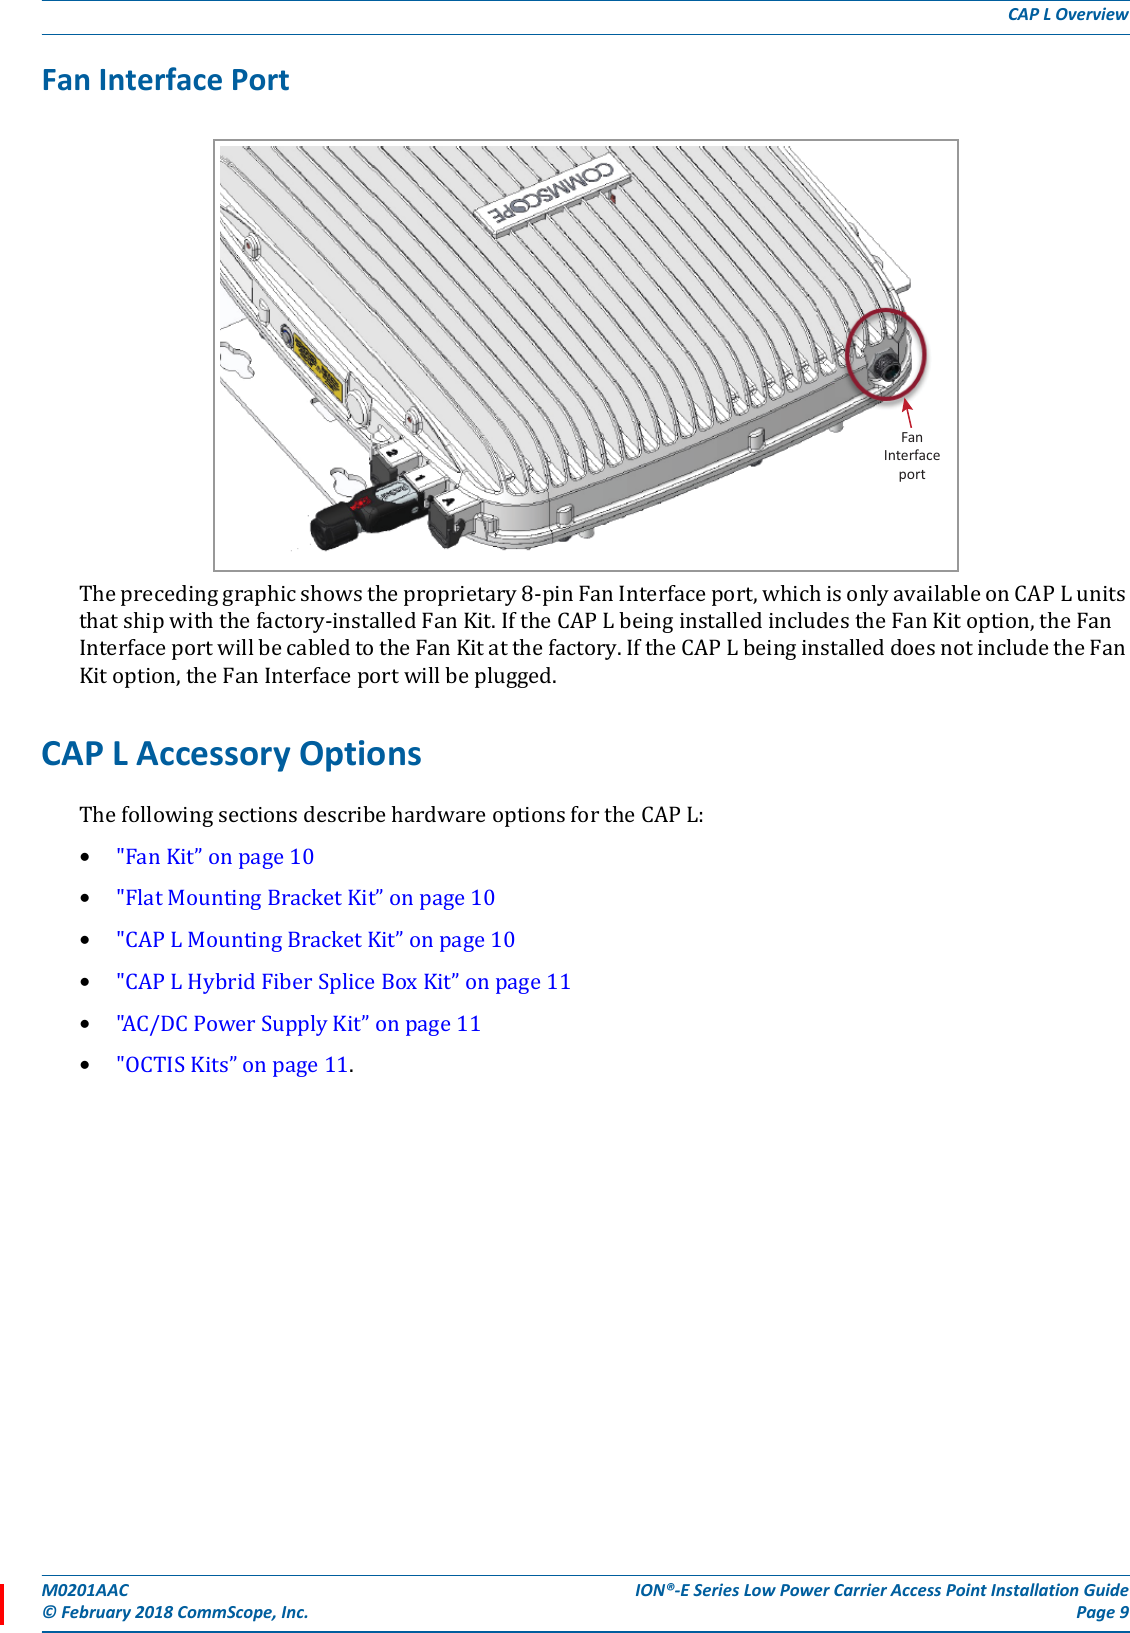 M0201AAC ION®-E Series Low Power Carrier Access Point Installation Guide© February 2018 CommScope, Inc. Page 9CAP L OverviewFan Interface PortTheprecedinggraphicshowstheproprietary8-pinFanInterfaceport,whichisonlyavailableonCAPLunitsthatshipwiththefactory-installedFanKit.IftheCAPLbeinginstalledincludestheFanKitoption,theFanInterfaceportwillbecabledtotheFanKitatthefactory.IftheCAPLbeinginstalleddoesnotincludetheFanKitoption,theFanInterfaceportwillbeplugged.CAP L Accessory OptionsThefollowingsectionsdescribehardwareoptionsfortheCAPL:•&quot;FanKit”onpage10•&quot;FlatMountingBracketKit”onpage10•&quot;CAPLMountingBracketKit”onpage10•&quot;CAPLHybridFiberSpliceBoxKit”onpage11•&quot;AC/DCPowerSupplyKit”onpage11•&quot;OCTISKits”onpage11.FanInterfaceport